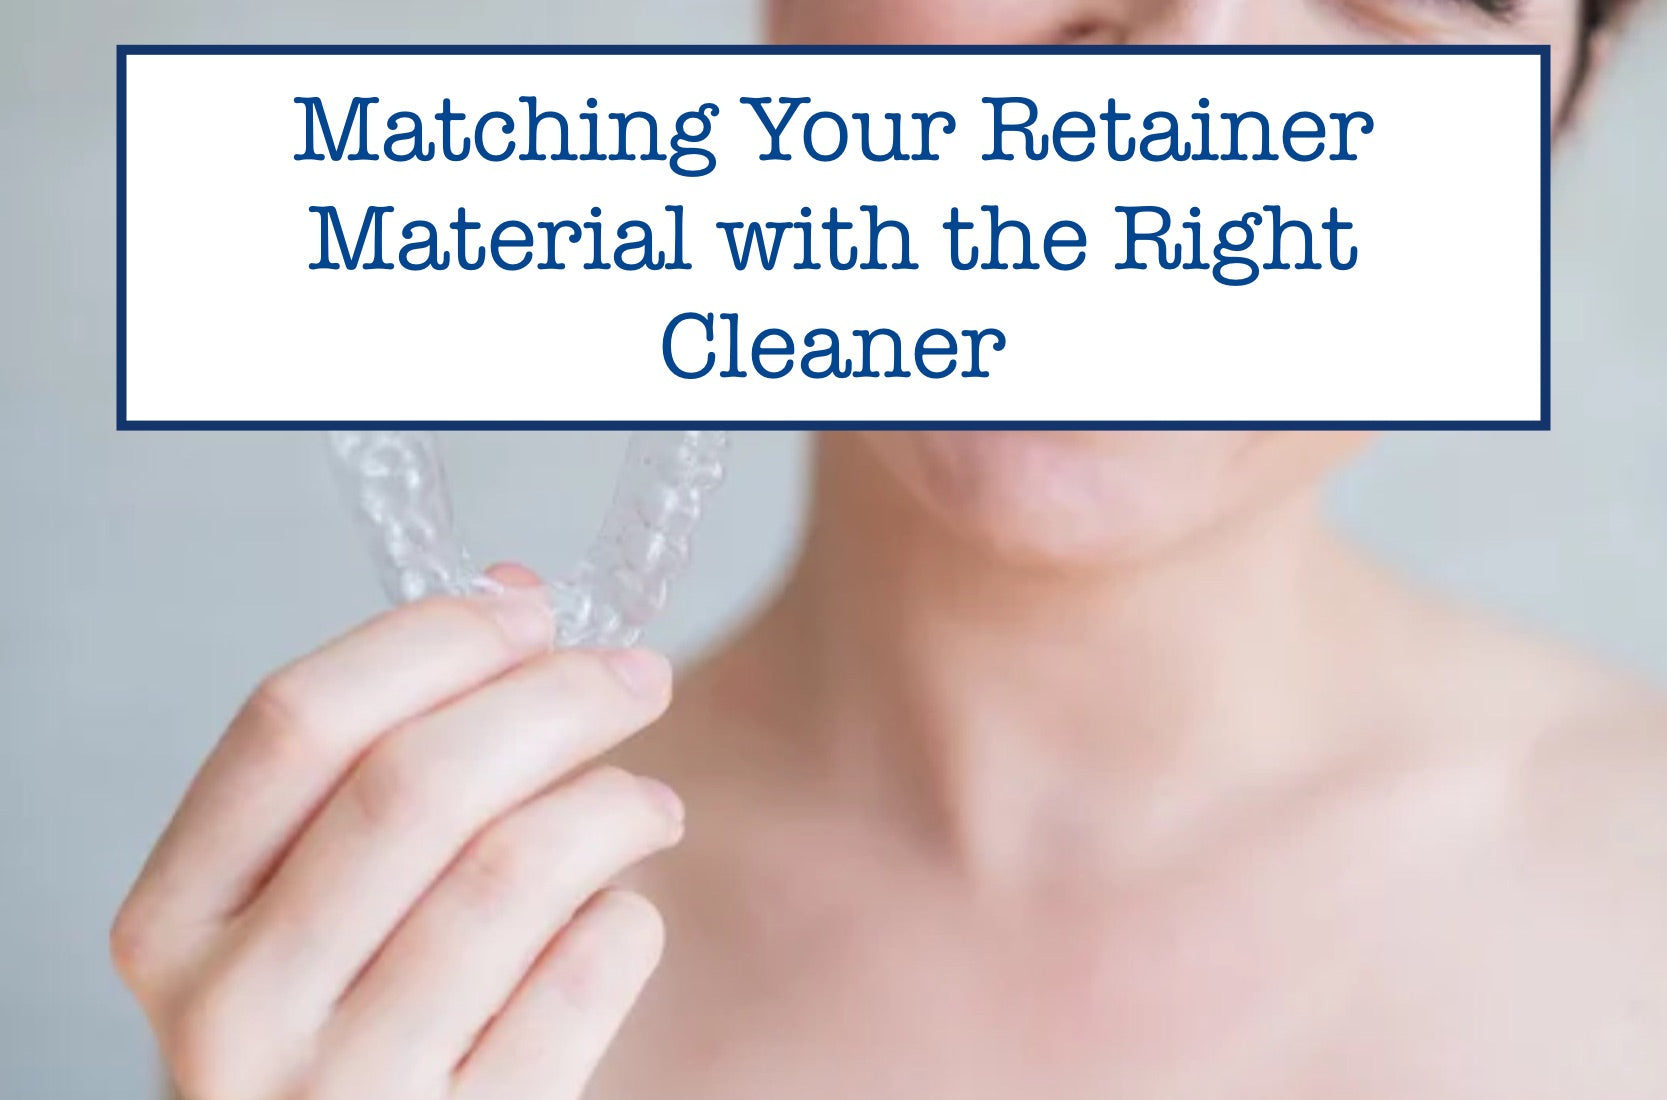 Matching Your Retainer Material with the Right Cleaner